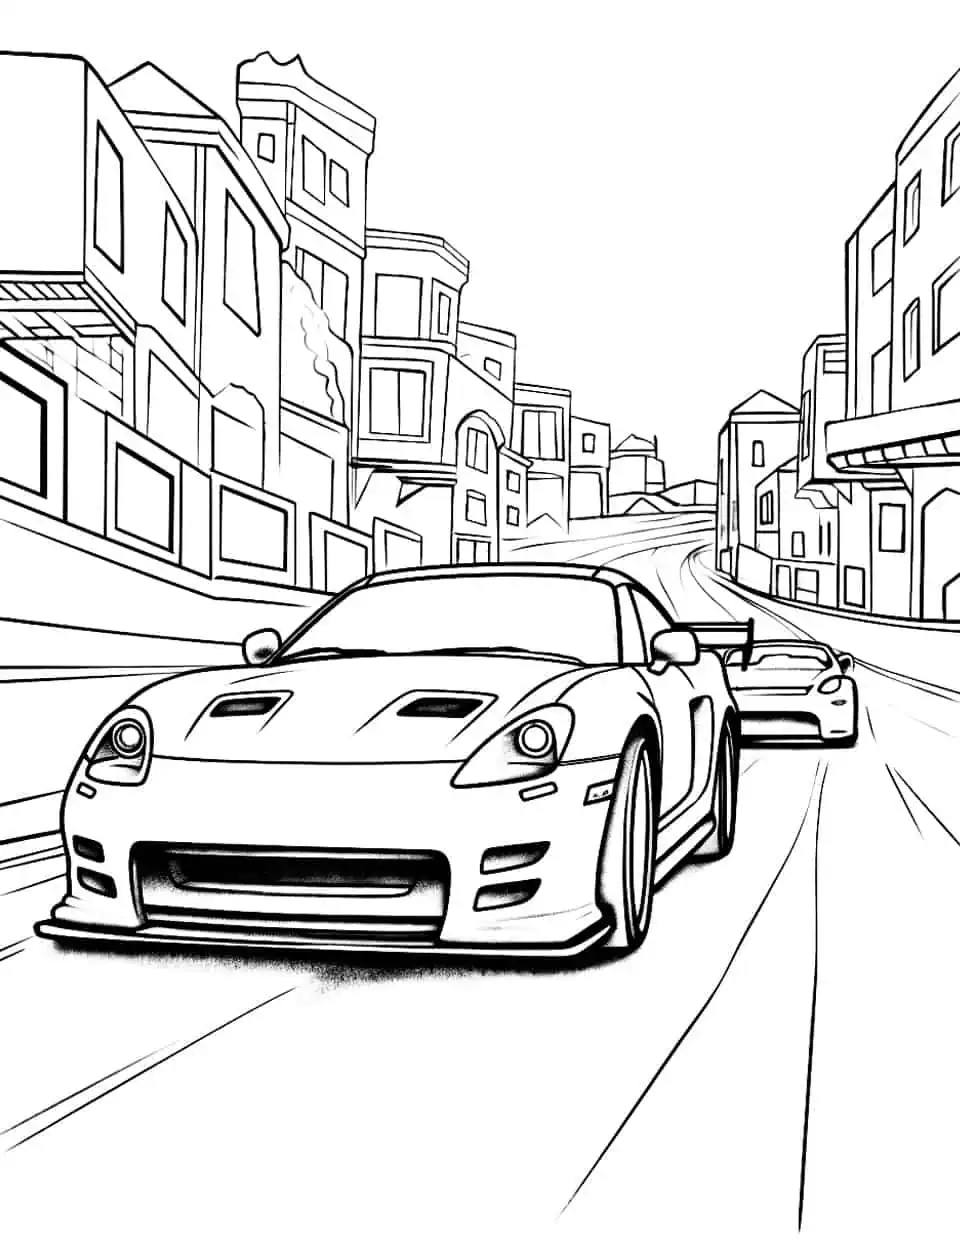 JDM Street Race Car Coloring Page - An illustration of a high-intensity street race with JDM cars for kids who love action.